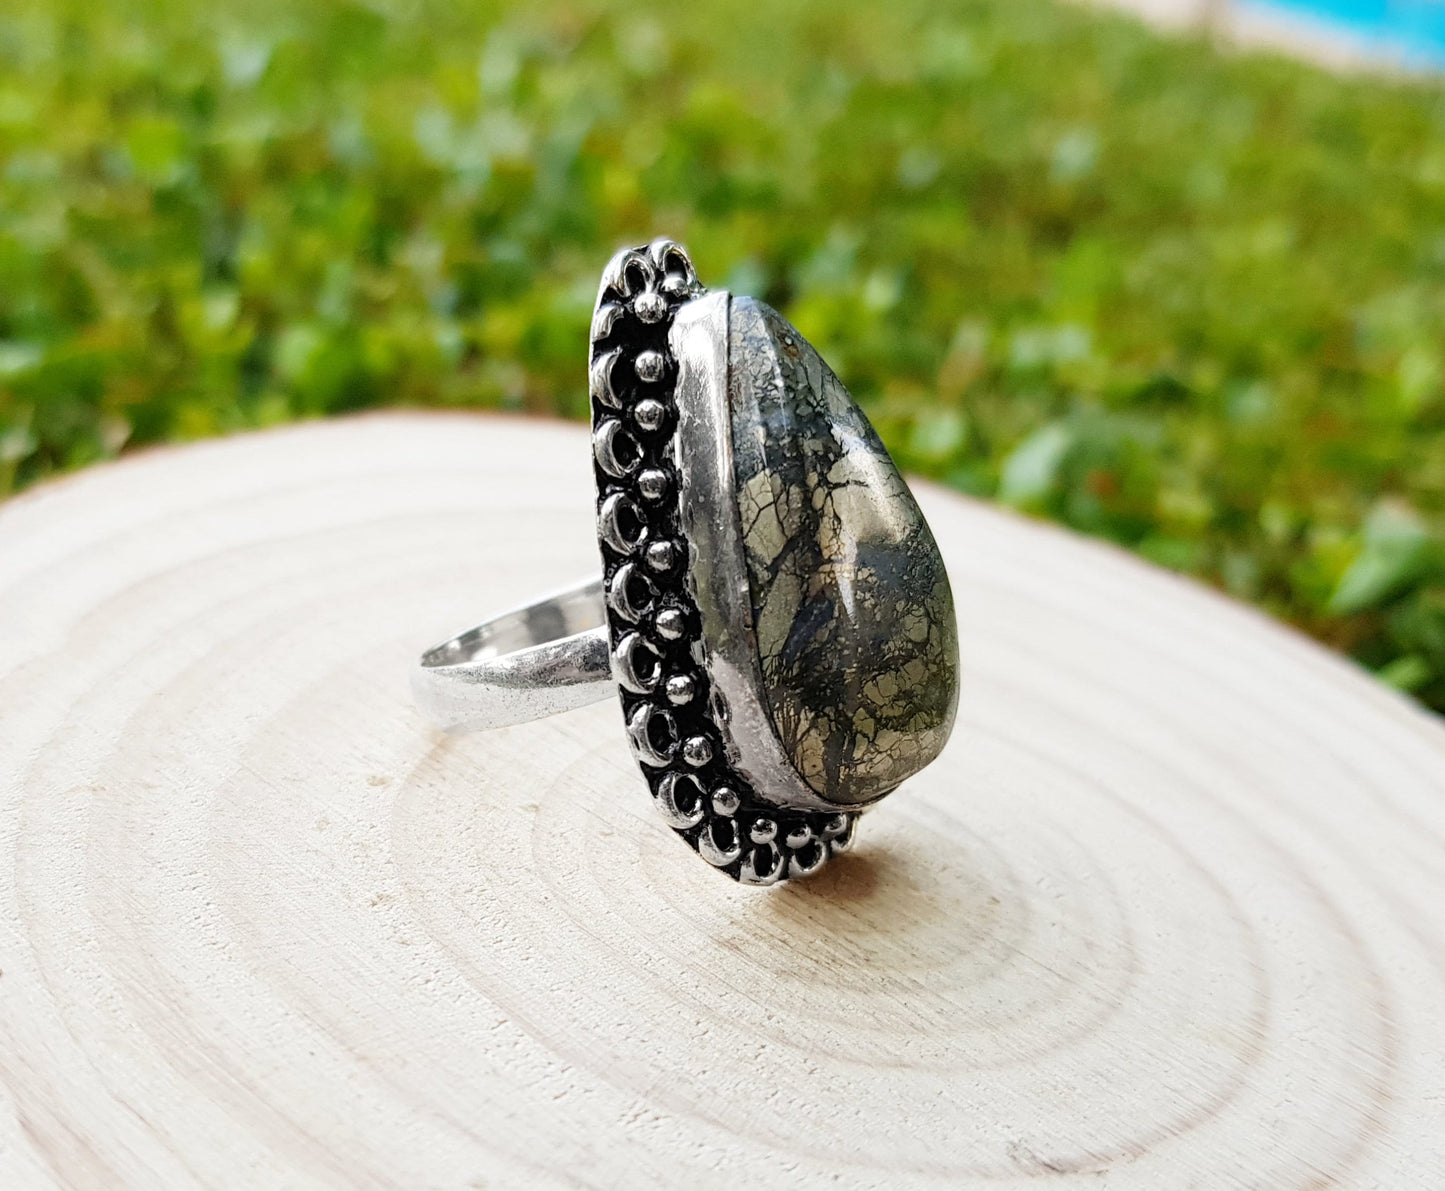 Apache Gold Pyrite Statement Ring Size US 9 Sterling Silver Gemstone Ring Boho Rings GypsyJewellery One Of A Kind Gift